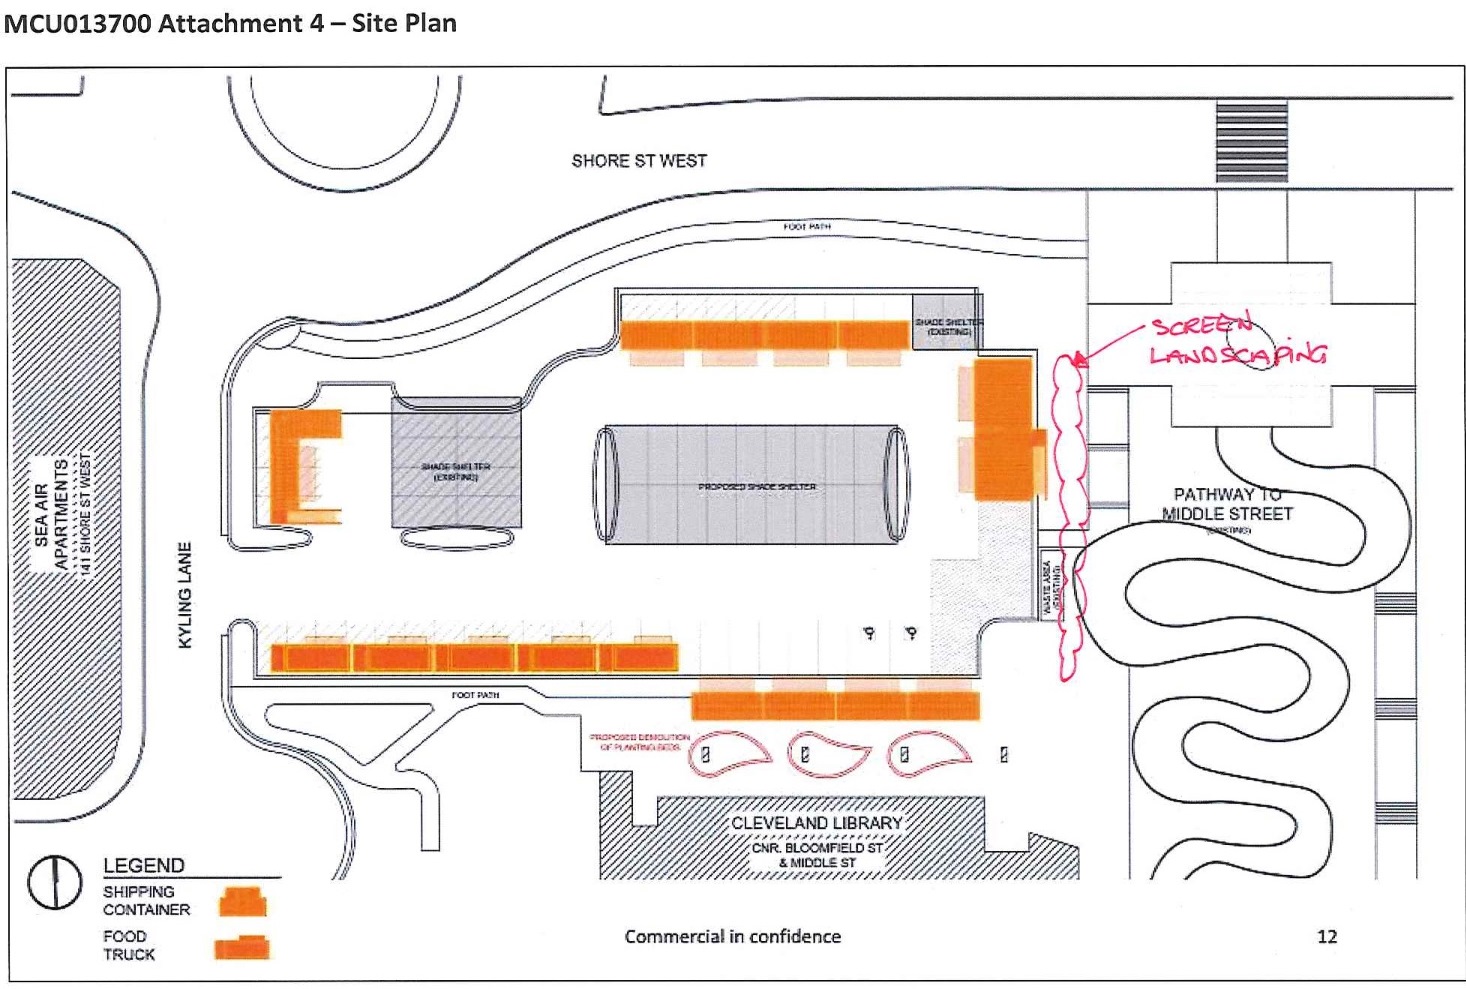 Eat Street Site Plan in report to council meeting on 10 August 2016